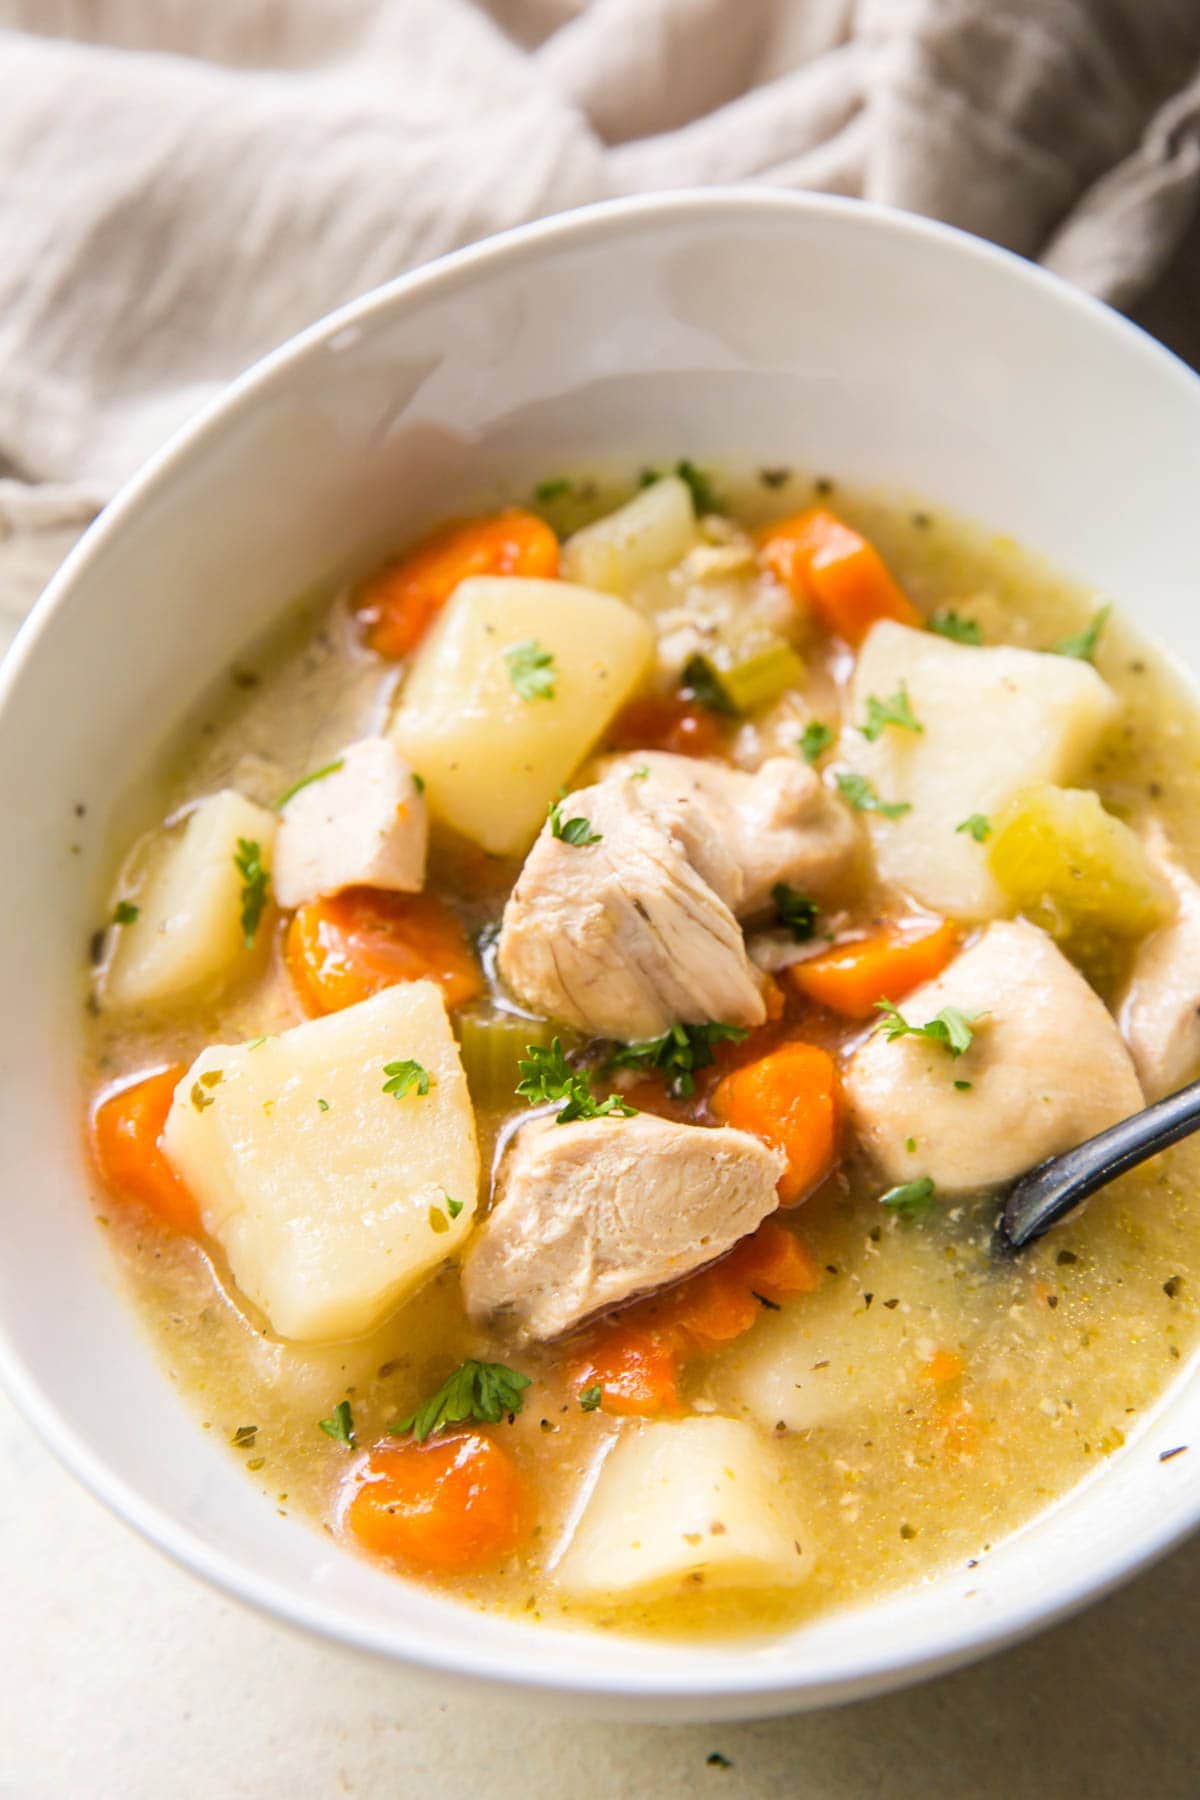 Seriously! 49+ Reasons for Easy Chicken Stew! This chicken stew takes